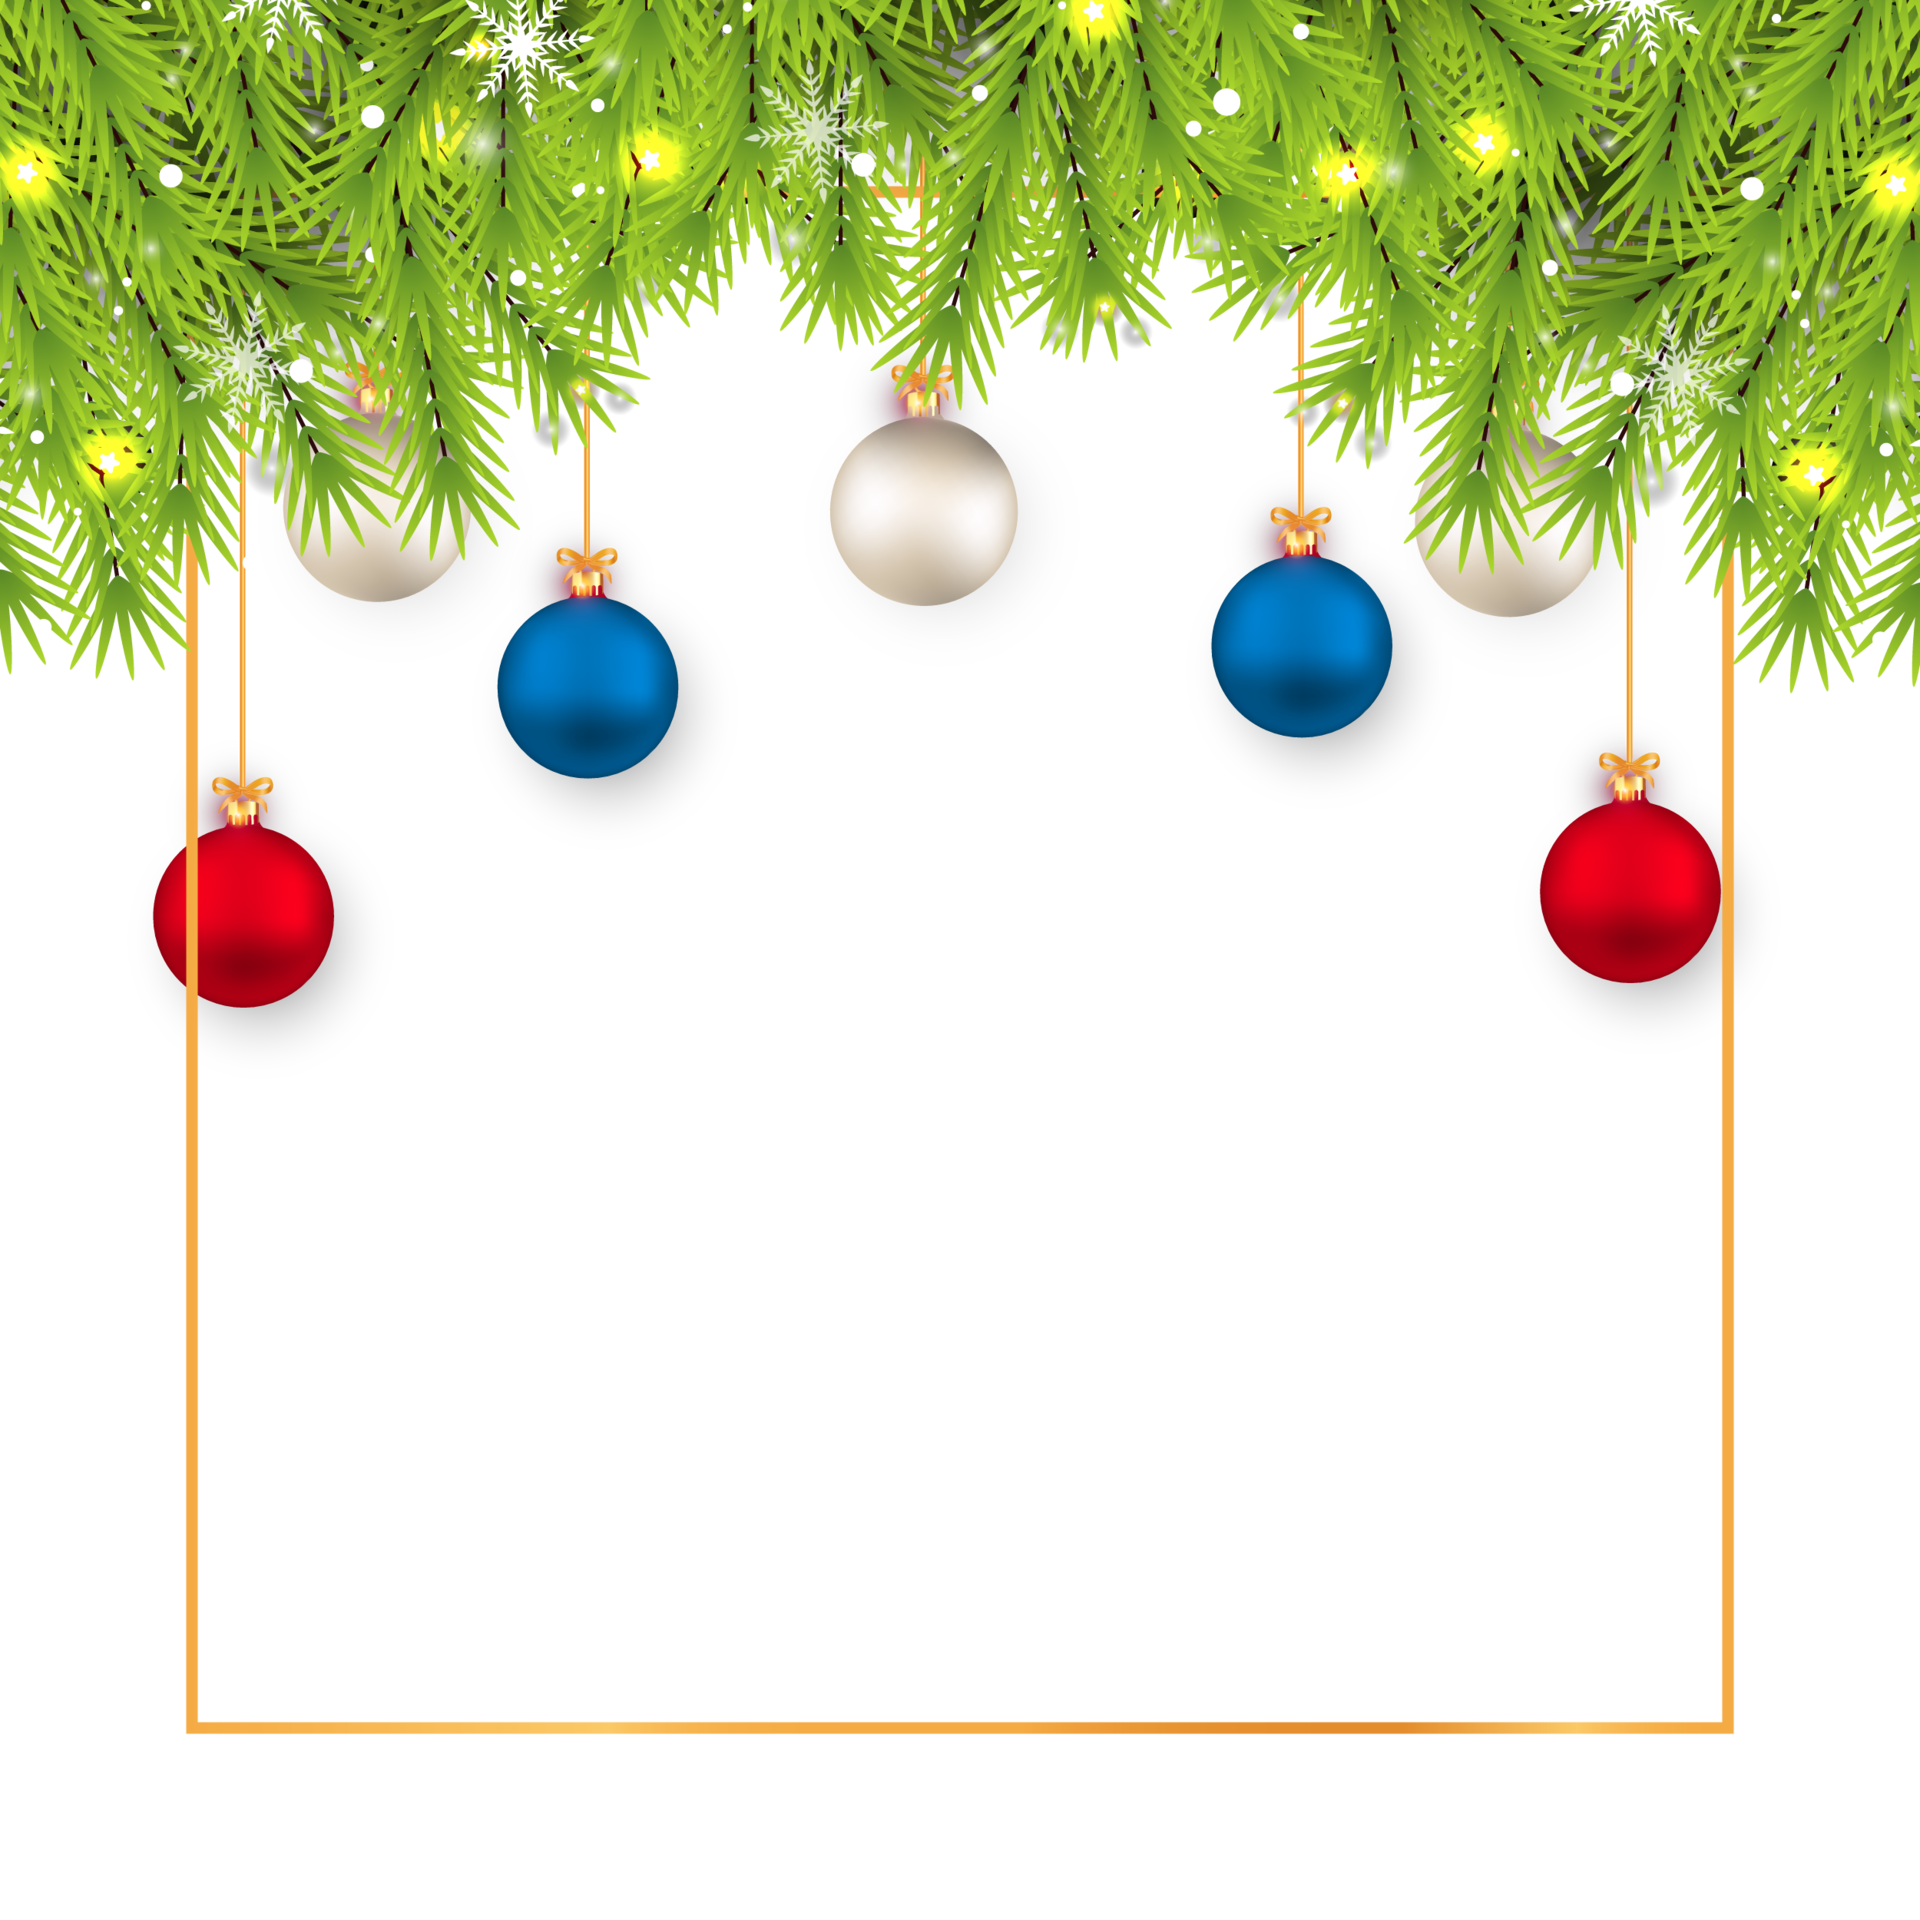 Free Christmas background PNG with realistic pine leaves. Xmas elements  with colorful balls and snowflakes. Merry Christmas decoration elements  with calligraphy and green leaves on transparent background. 9973880 PNG  with Transparent Background